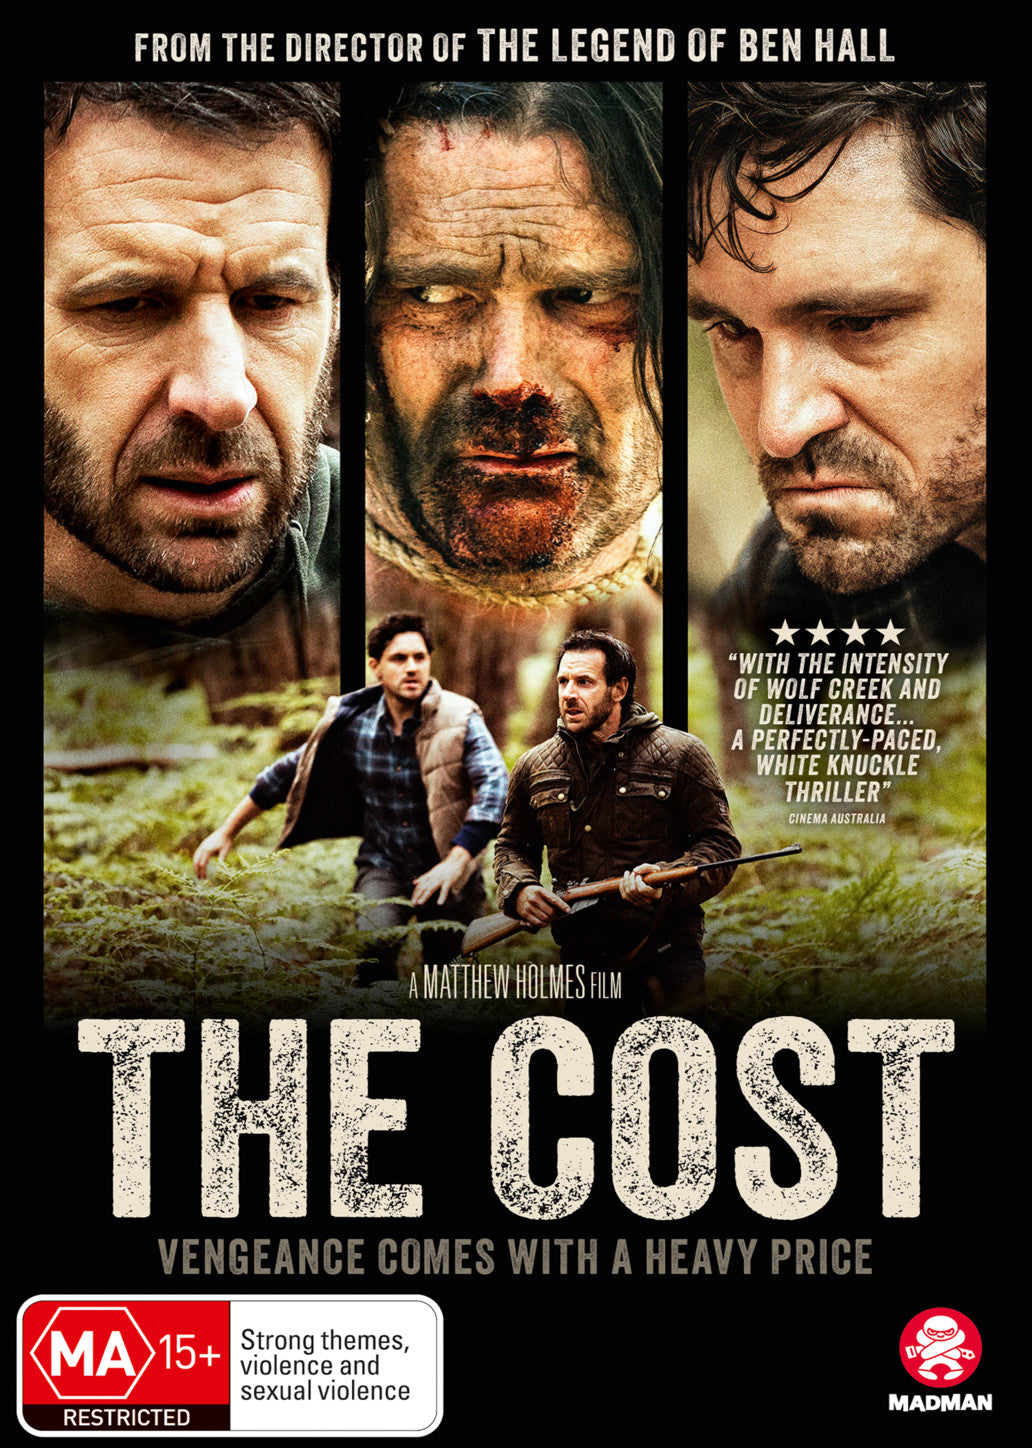 THE COST